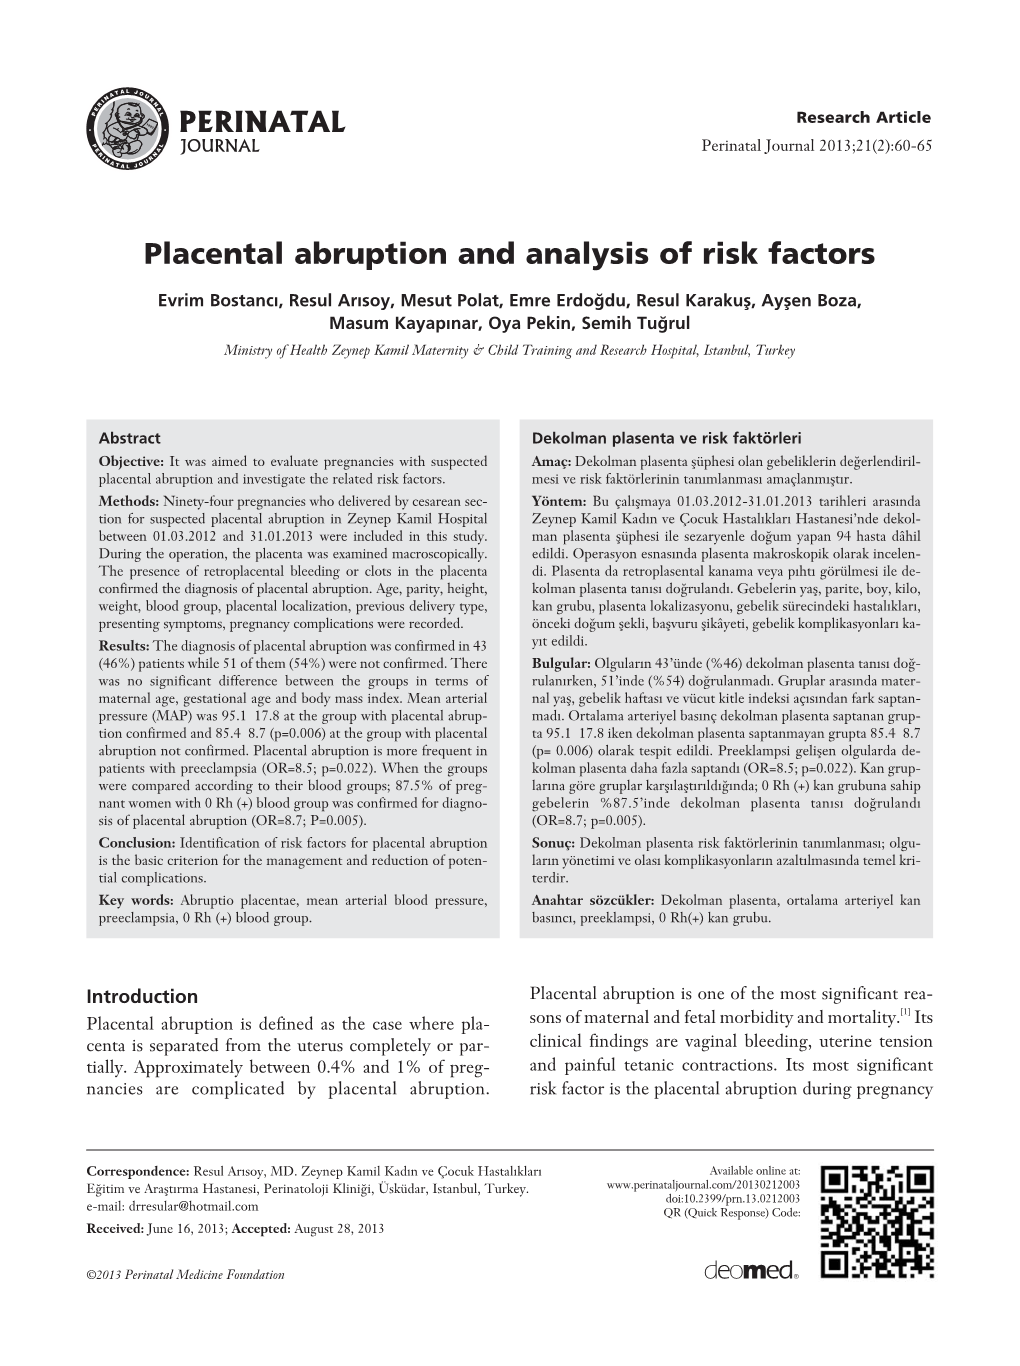 Placental Abruption and Analysis of Risk Factors